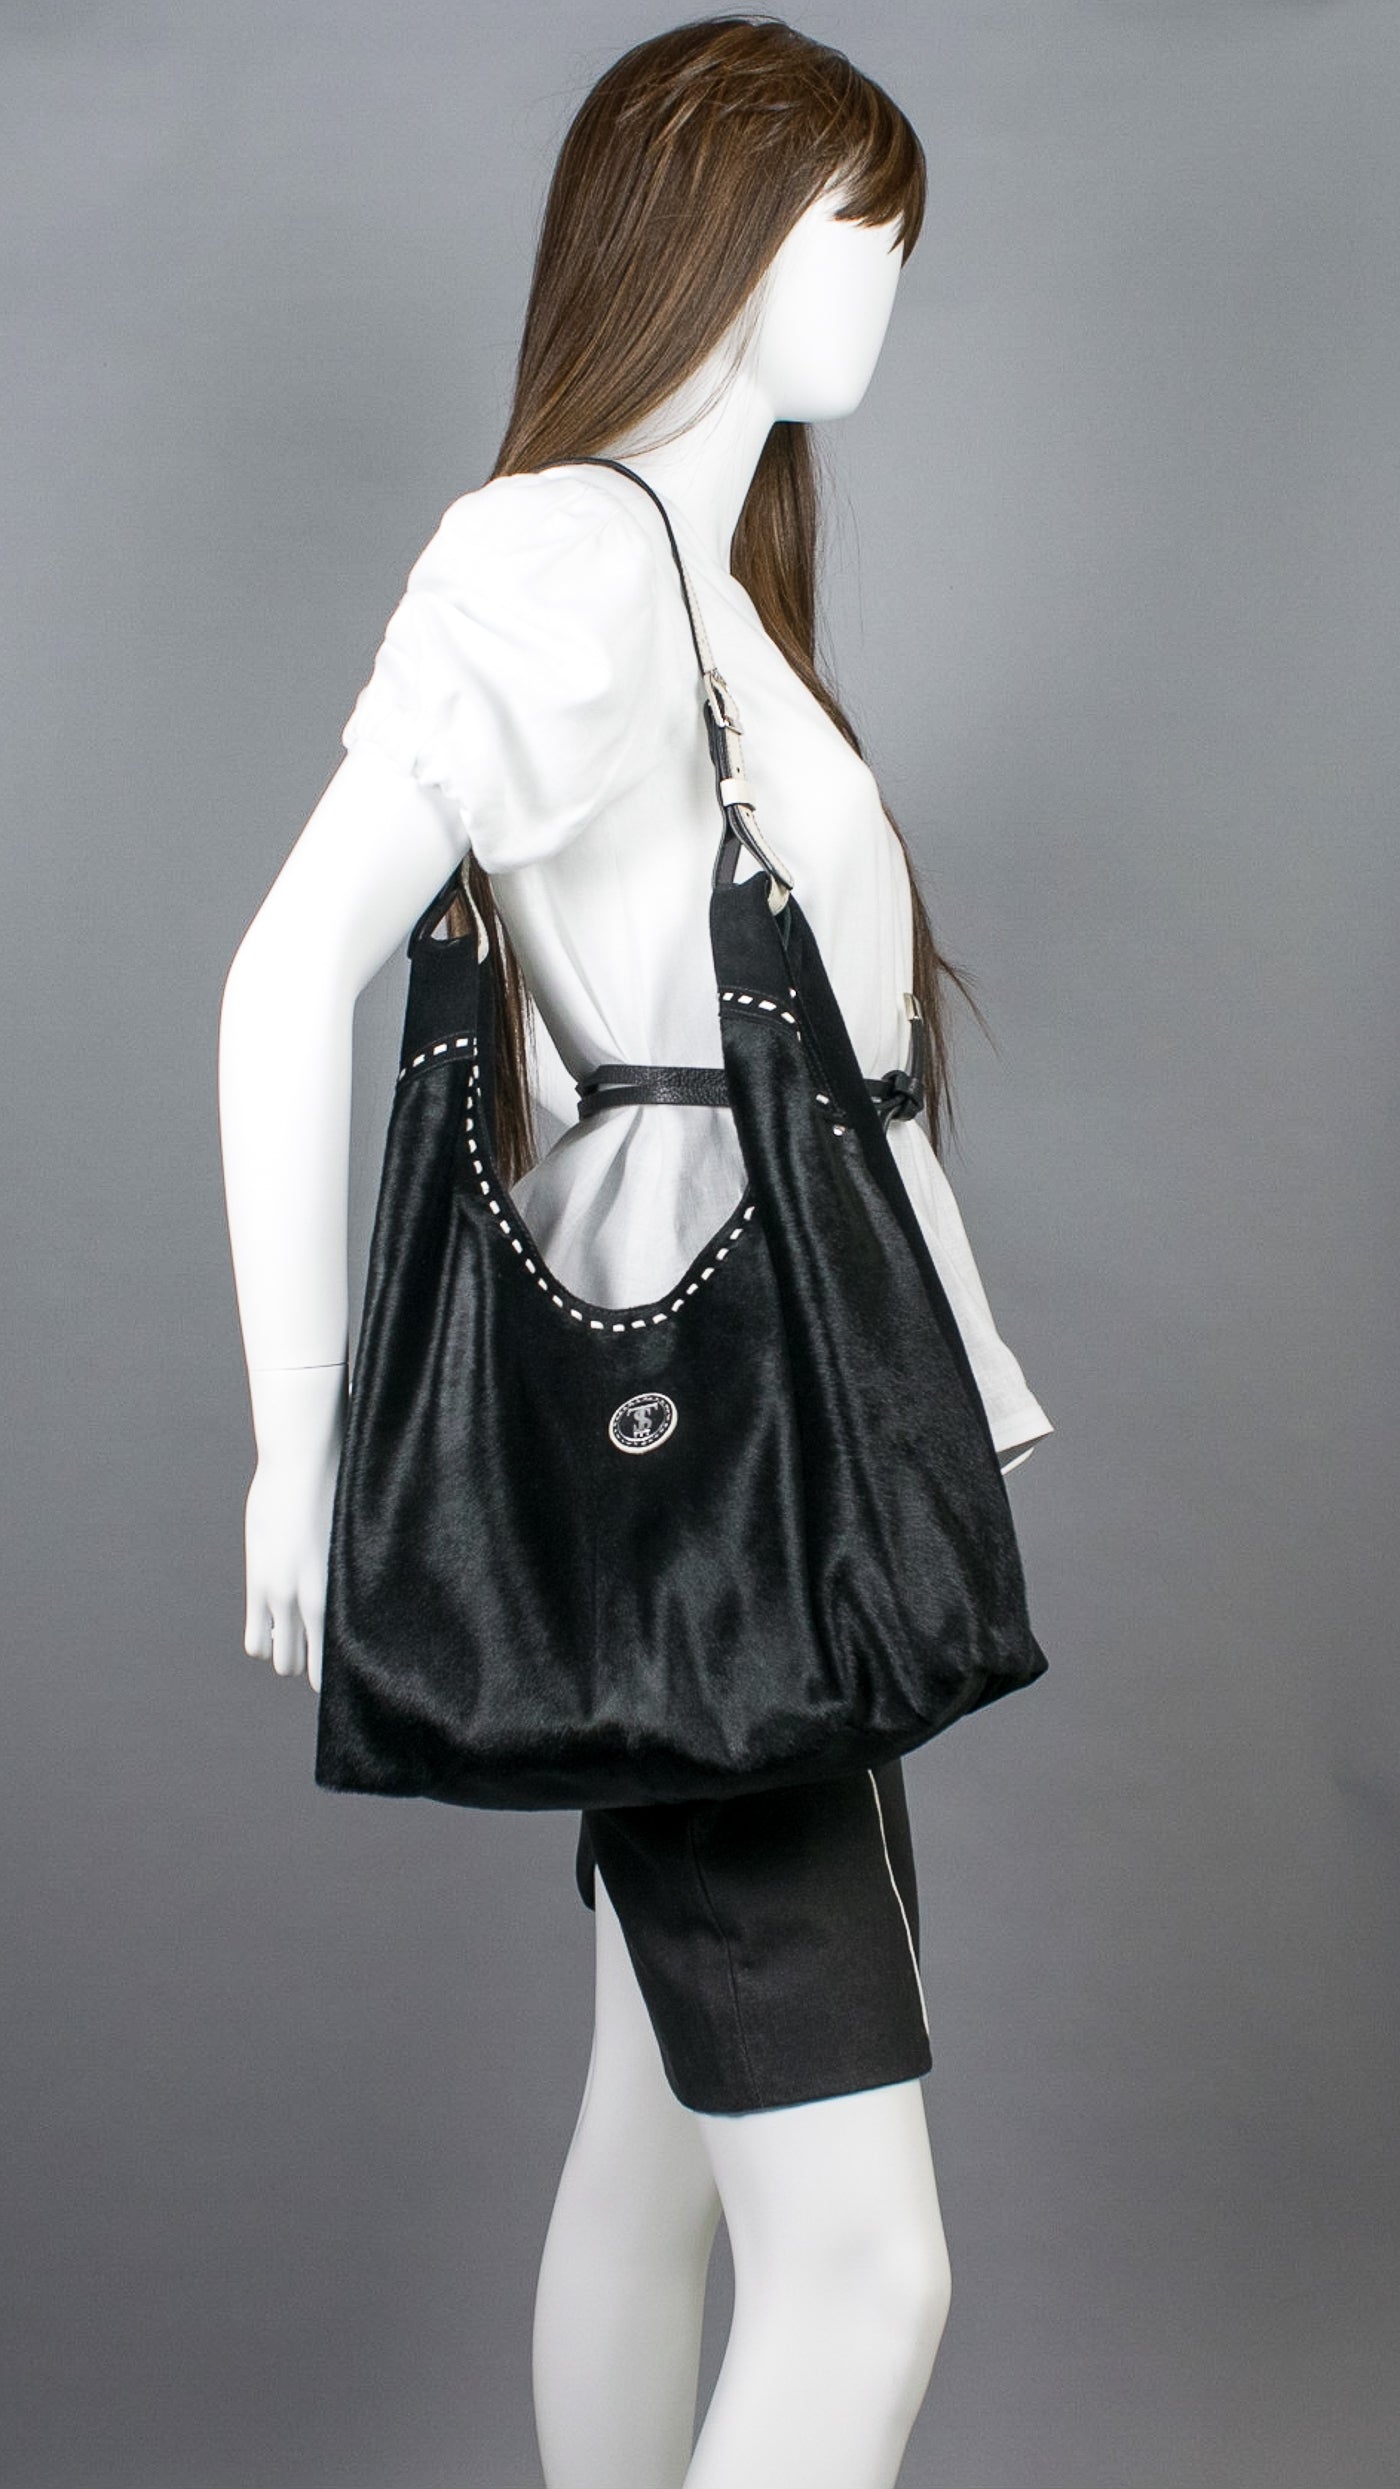 Model in white linen top wearing Leather hobo shoulder bag in jet black hair calf &amp; suede. Handcrafted by slow fashion indie designer Liv McClintock. Features hand laced white leather trim. Made in Wilmington Delaware USA.